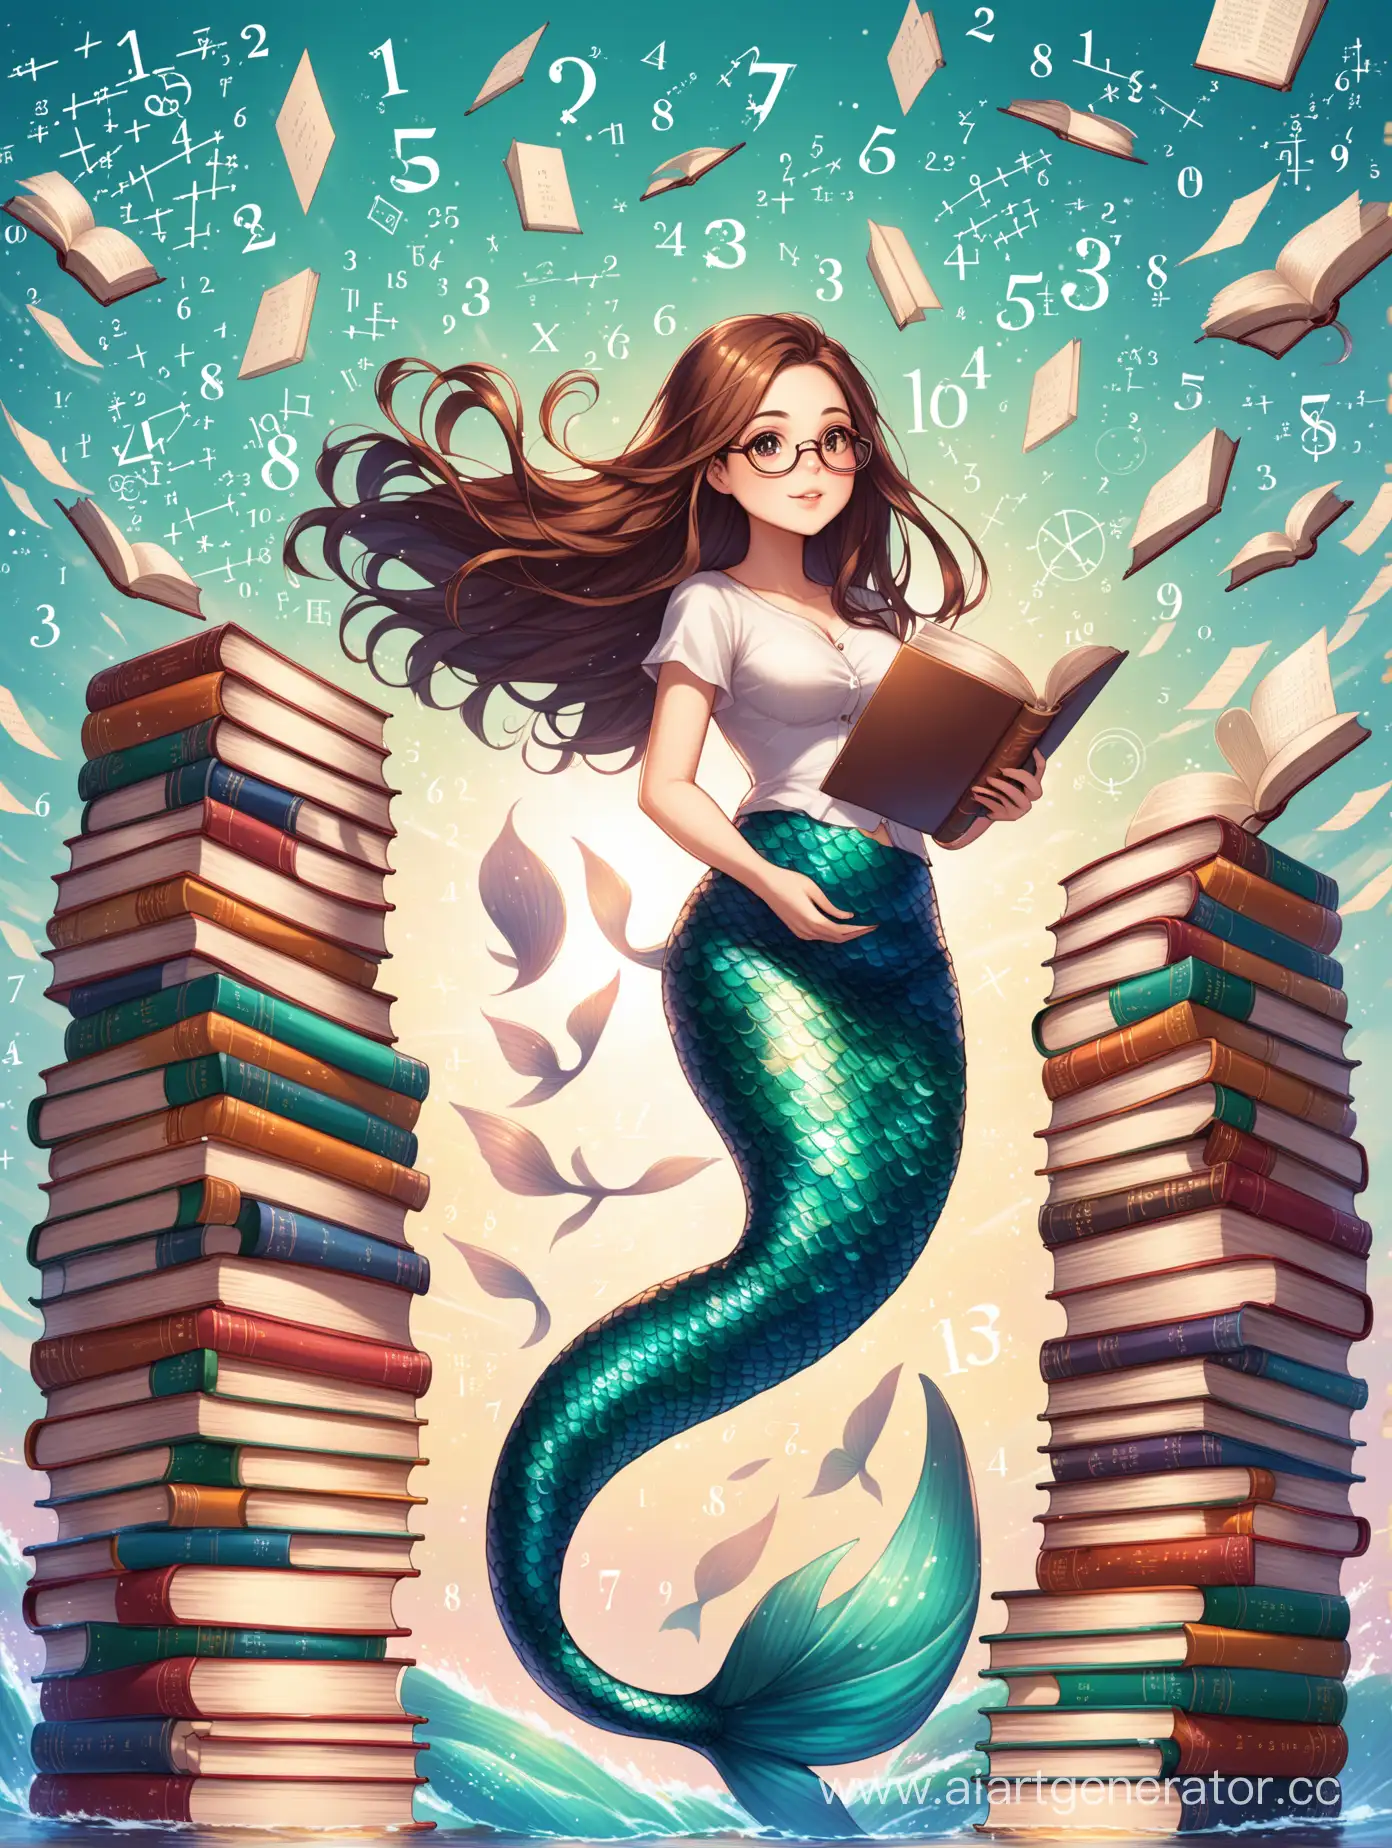 BrownHaired-Mermaid-with-Glasses-Surrounded-by-Mathematical-Formulas-and-Books